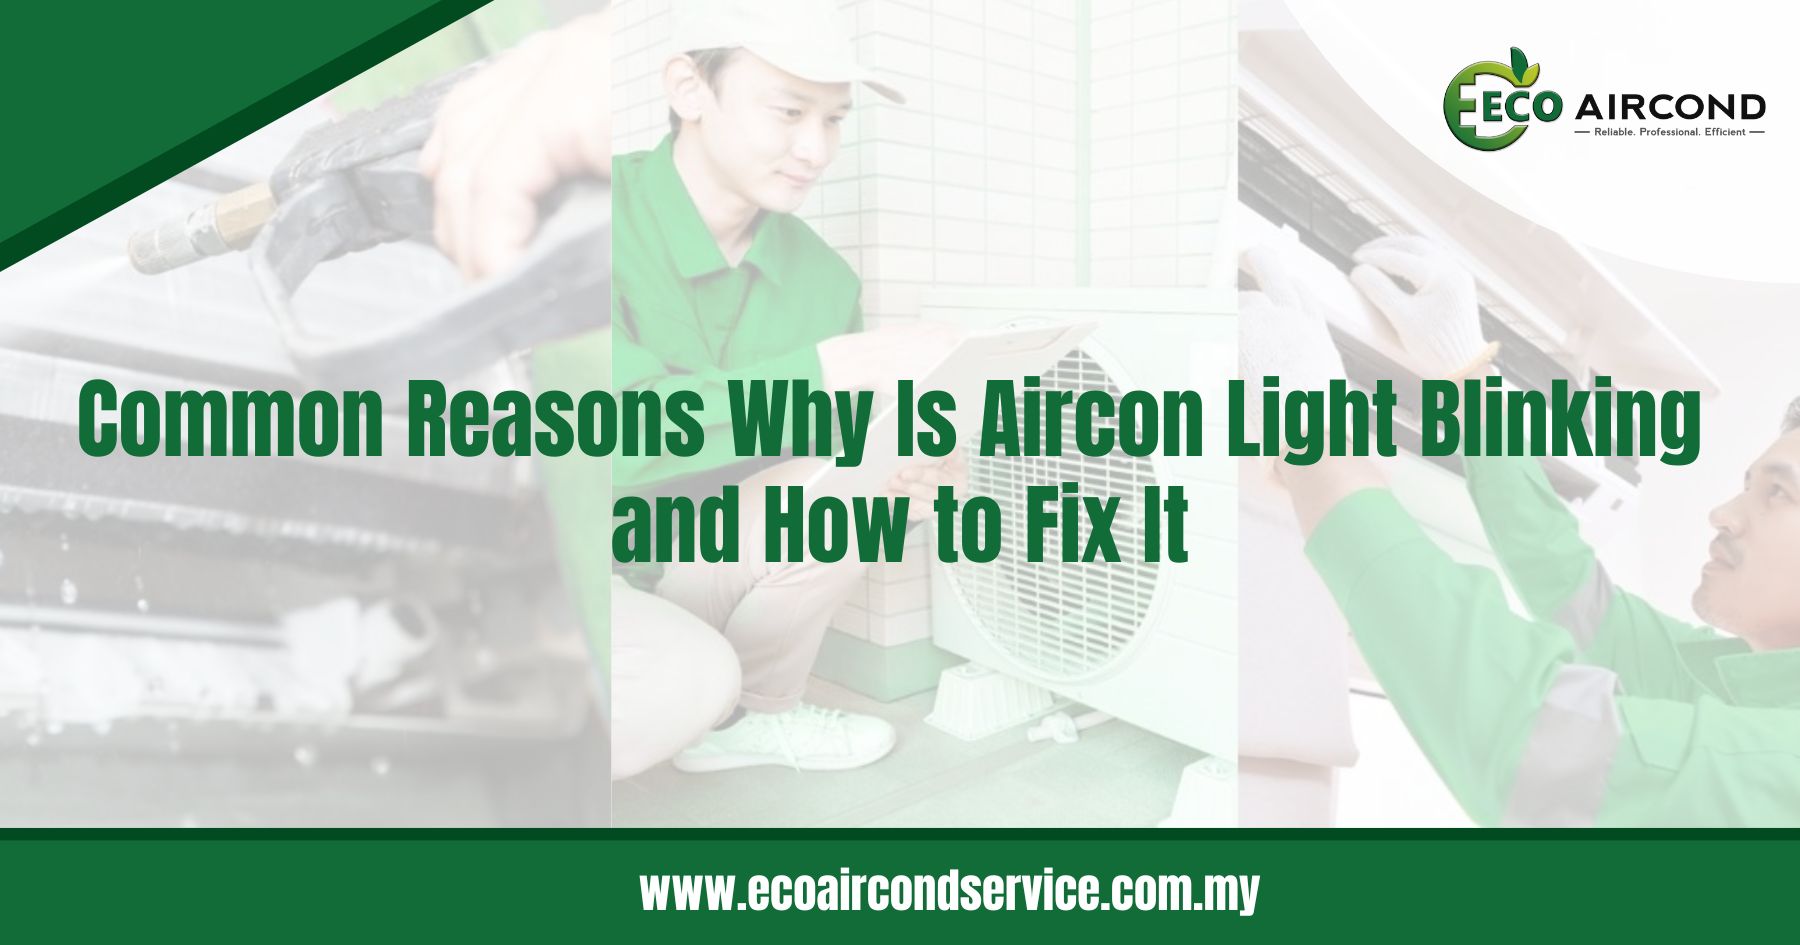 Common Reasons Why Is Aircon Light Blinking and How to Fix It